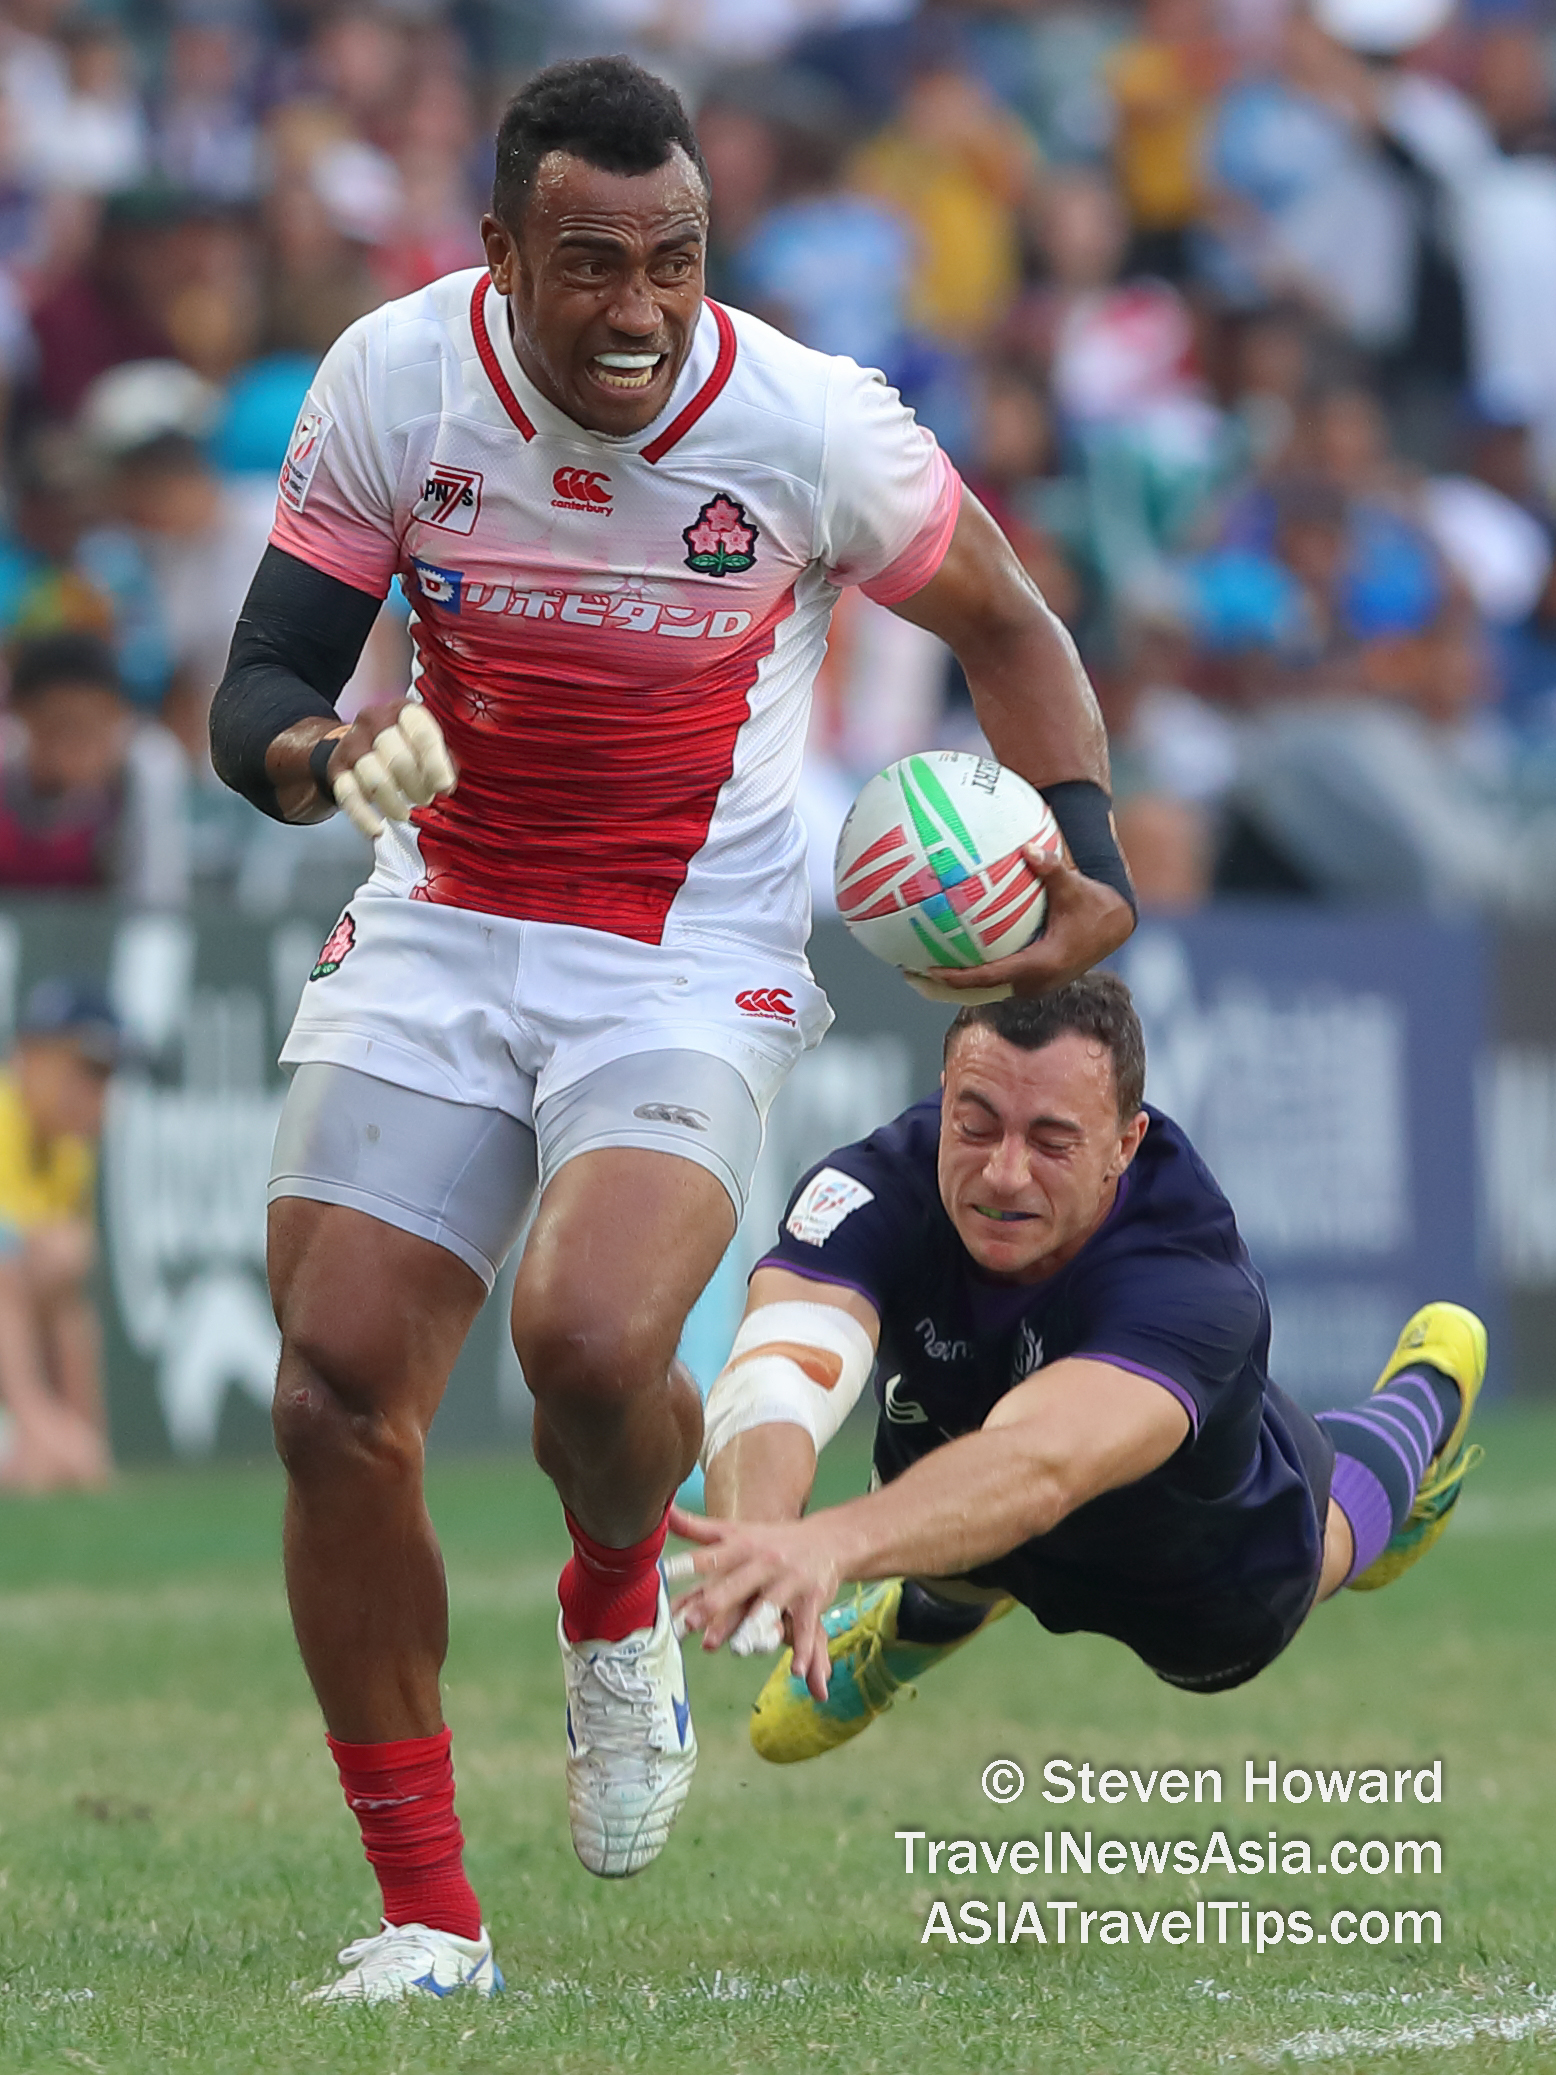 Japan in action against Scotland in the Cathay Pacific / HSBC Hong Kong Sevens 2019. Picture by Steven Howard of TravelNewsAsia.com Click to enlarge.